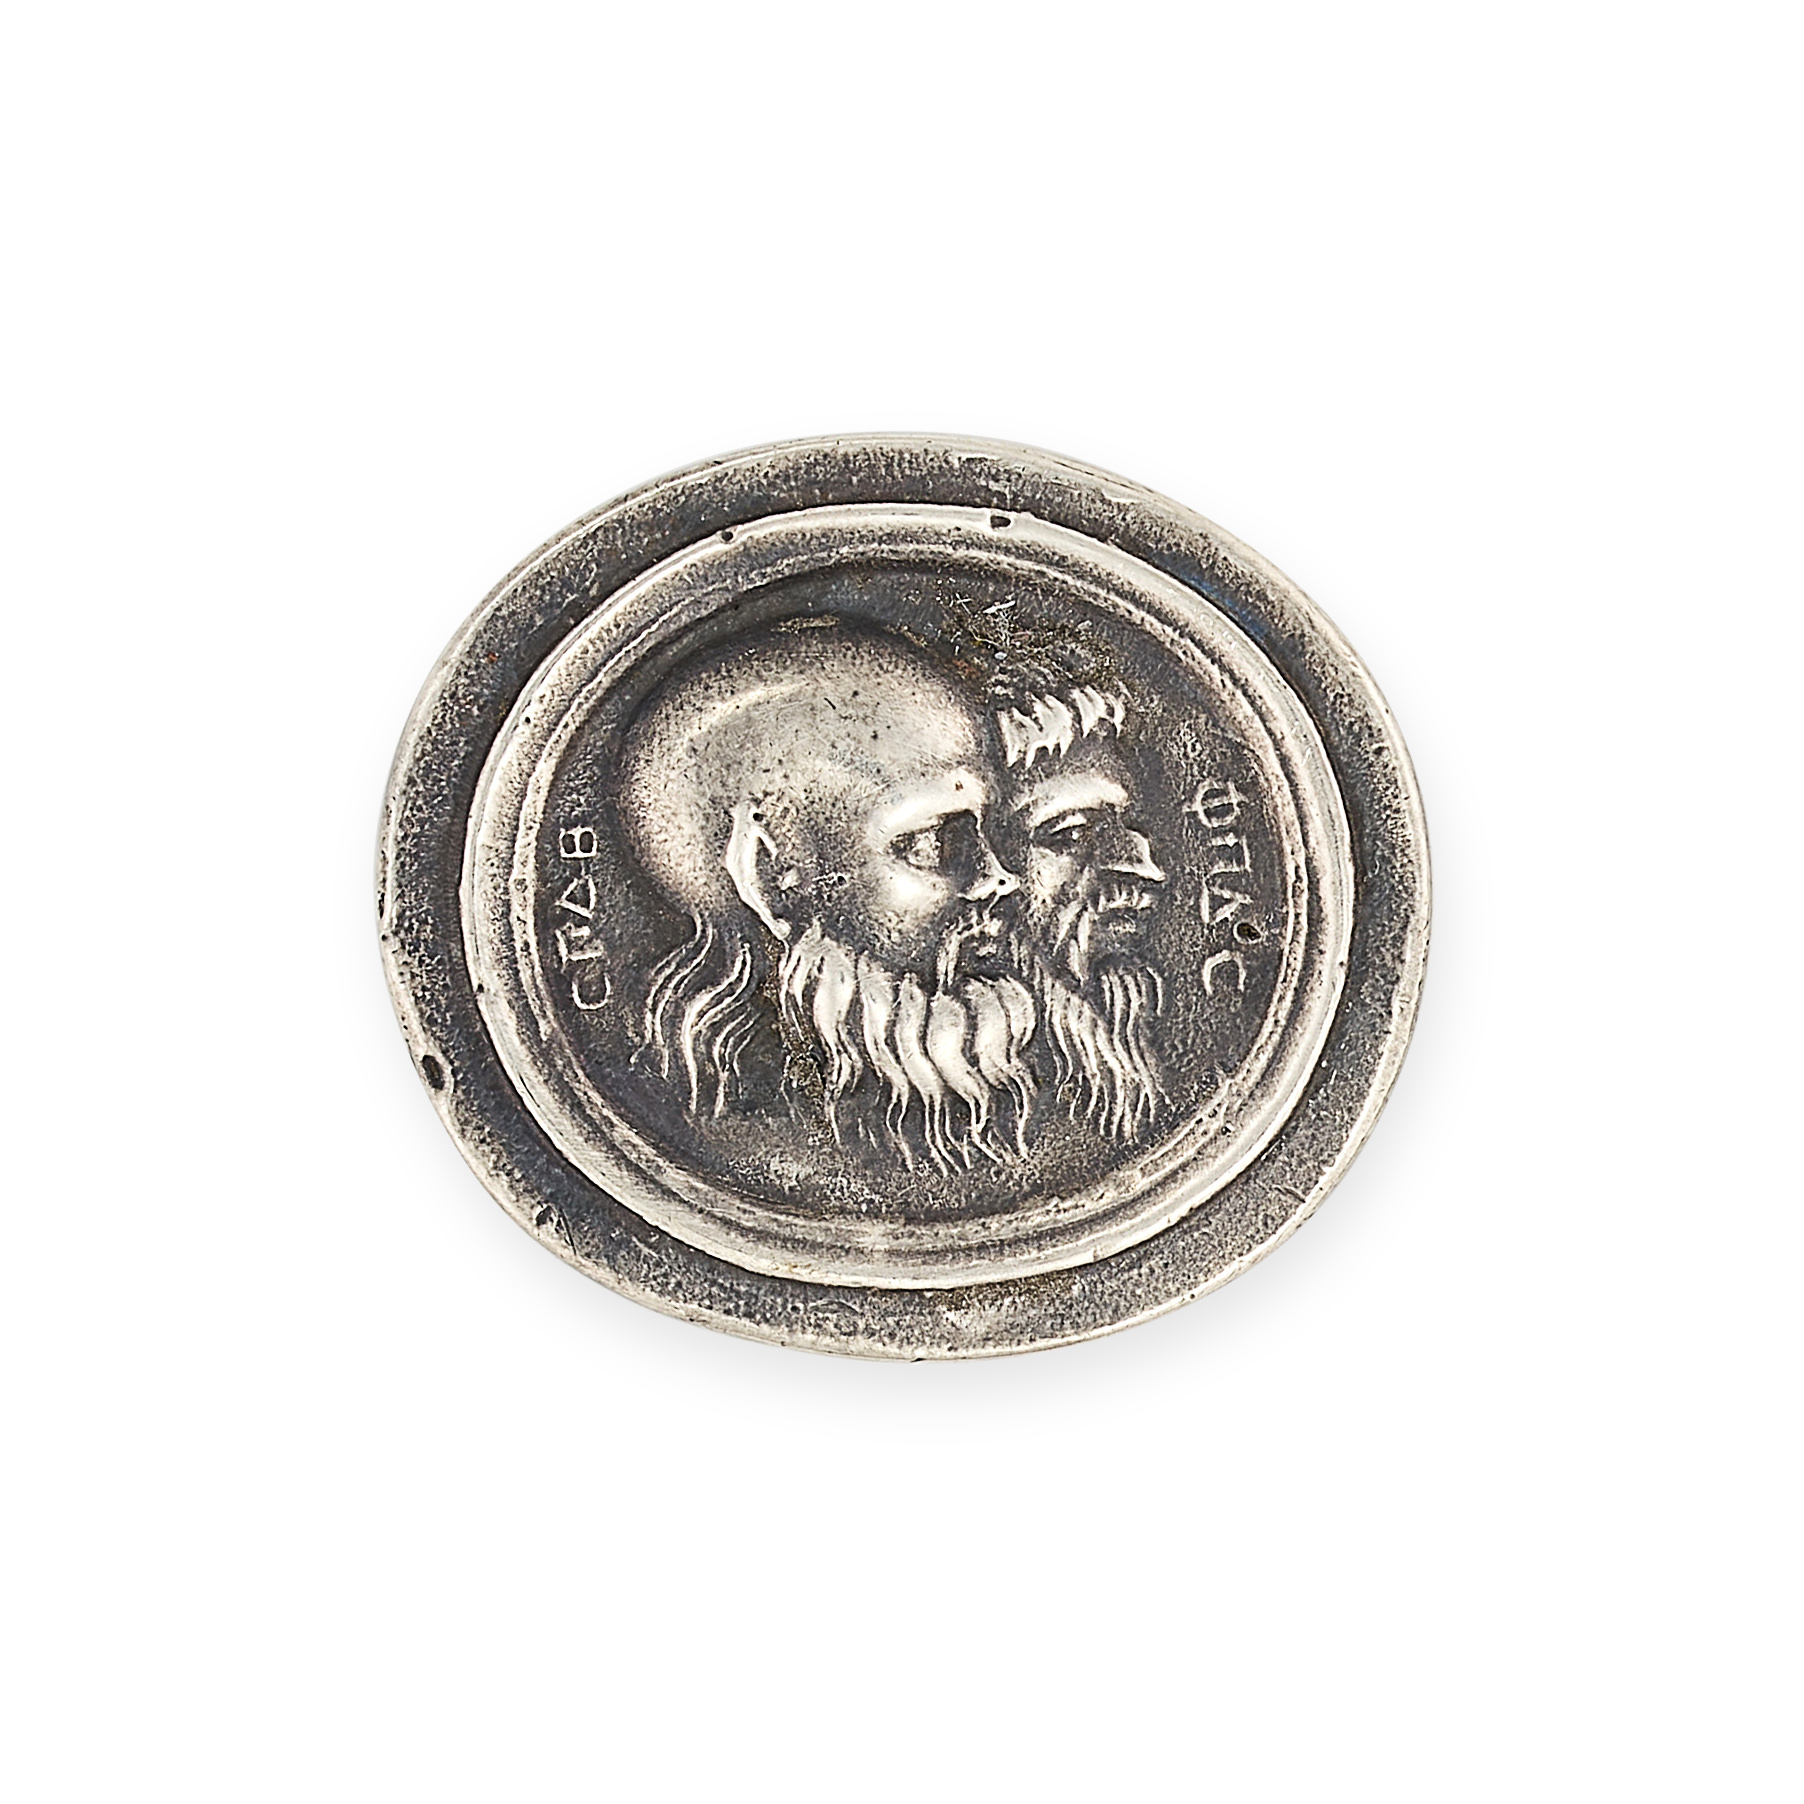 NO RESERVE - A SILVER CAMEO depicting an intaglio depicting Silenus and Pan, 2.1cm, 6.9g.